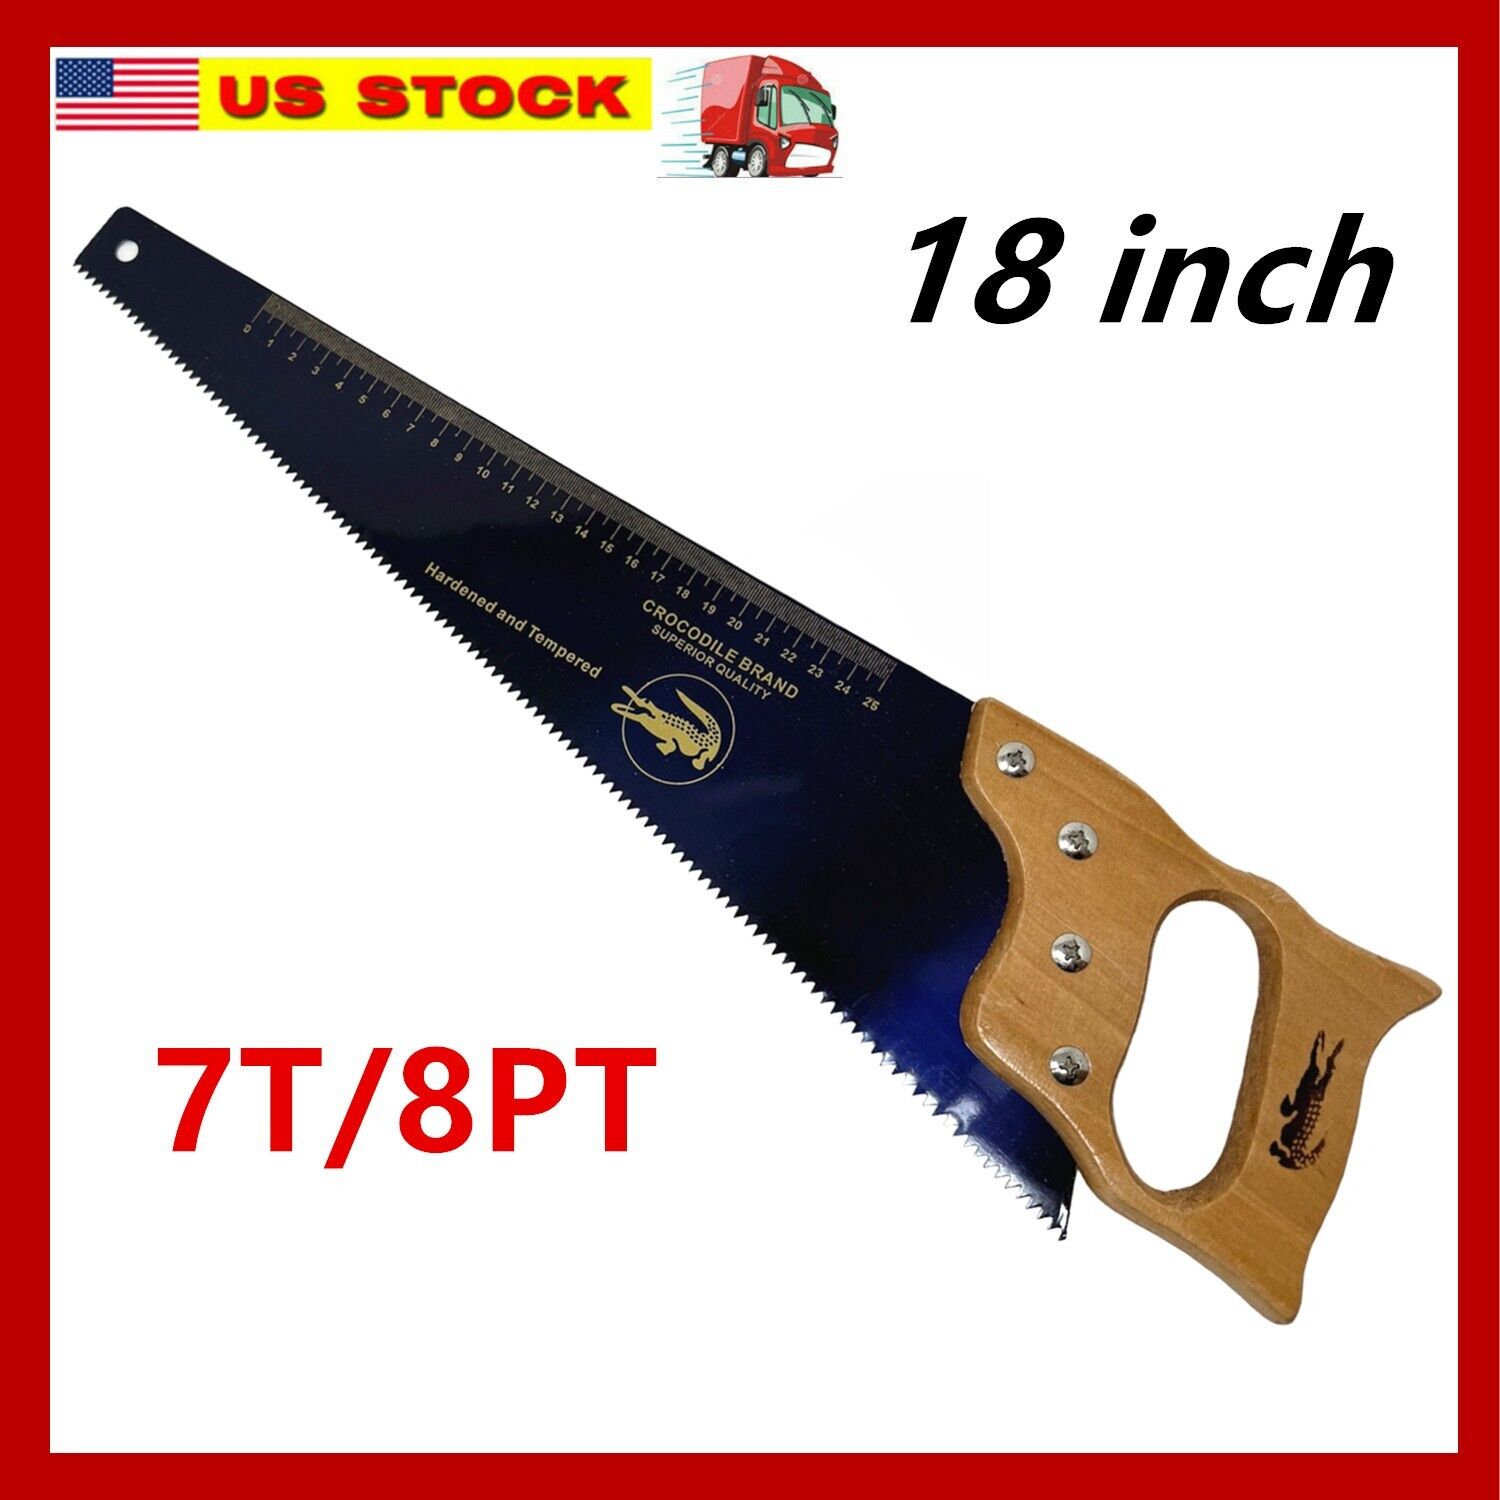 18 Inch Wood Hand Saw, 7 TPI Heavy Duty Wood Saw for Woodworking & Sawing, Black